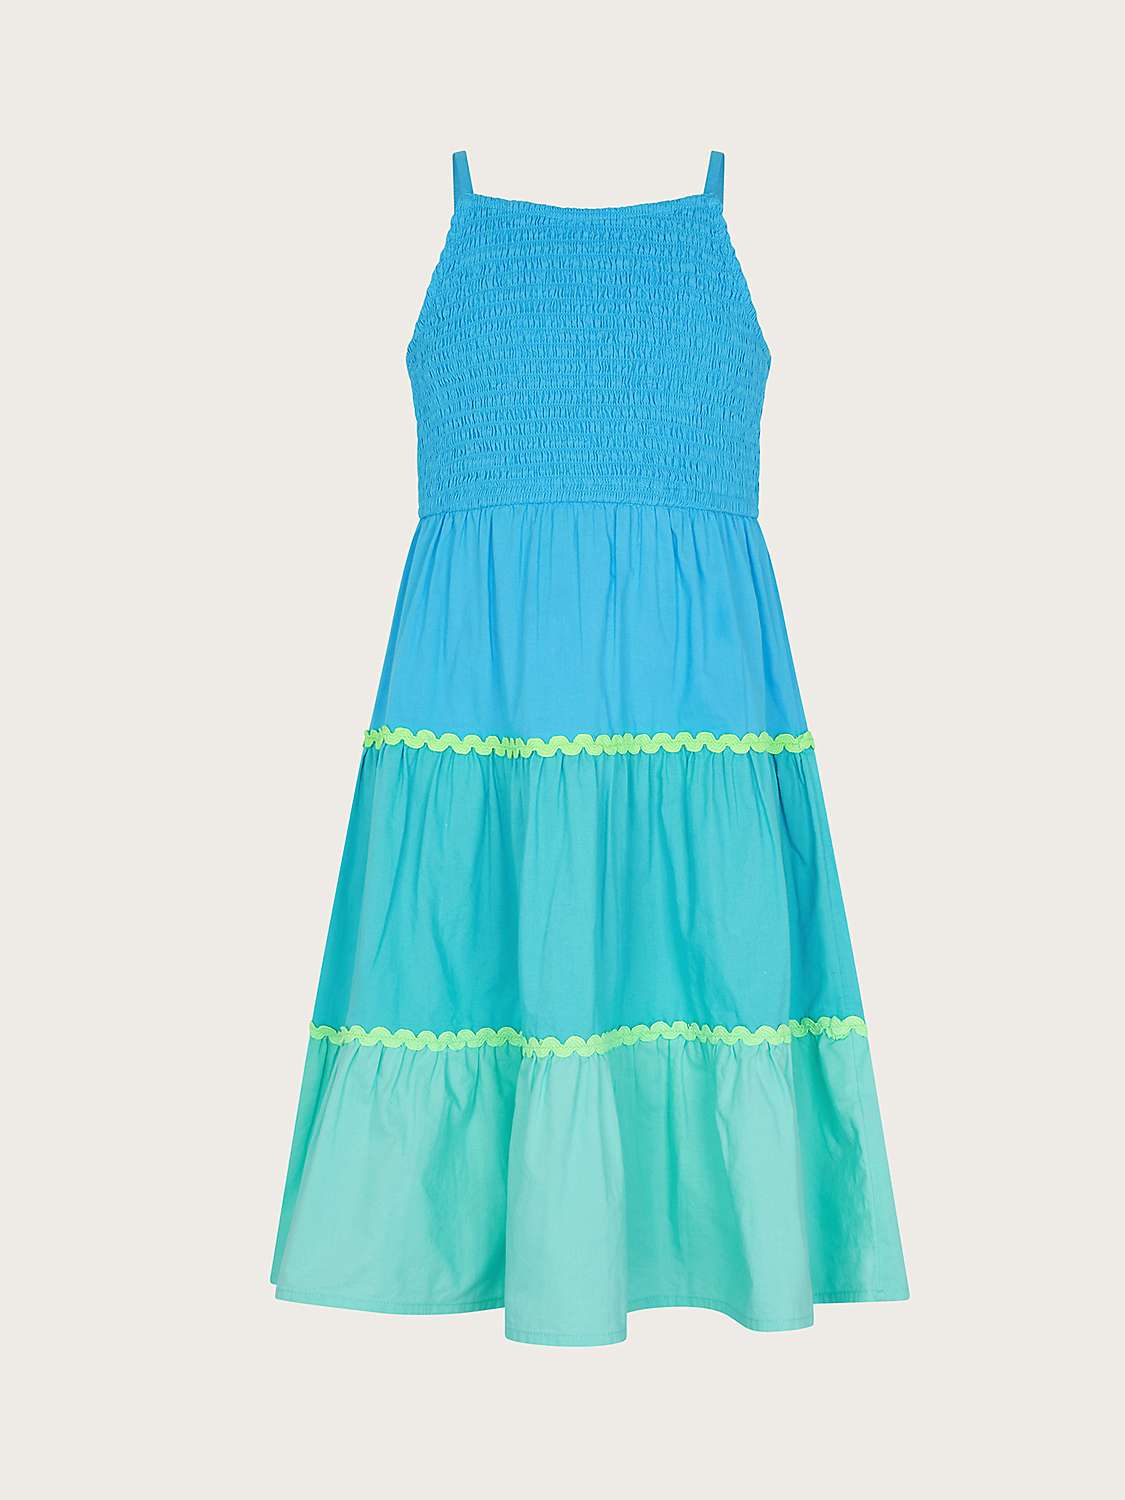 Buy Monsoon Kids' Ruched Colour Block Tiered Dress, Blue Online at johnlewis.com